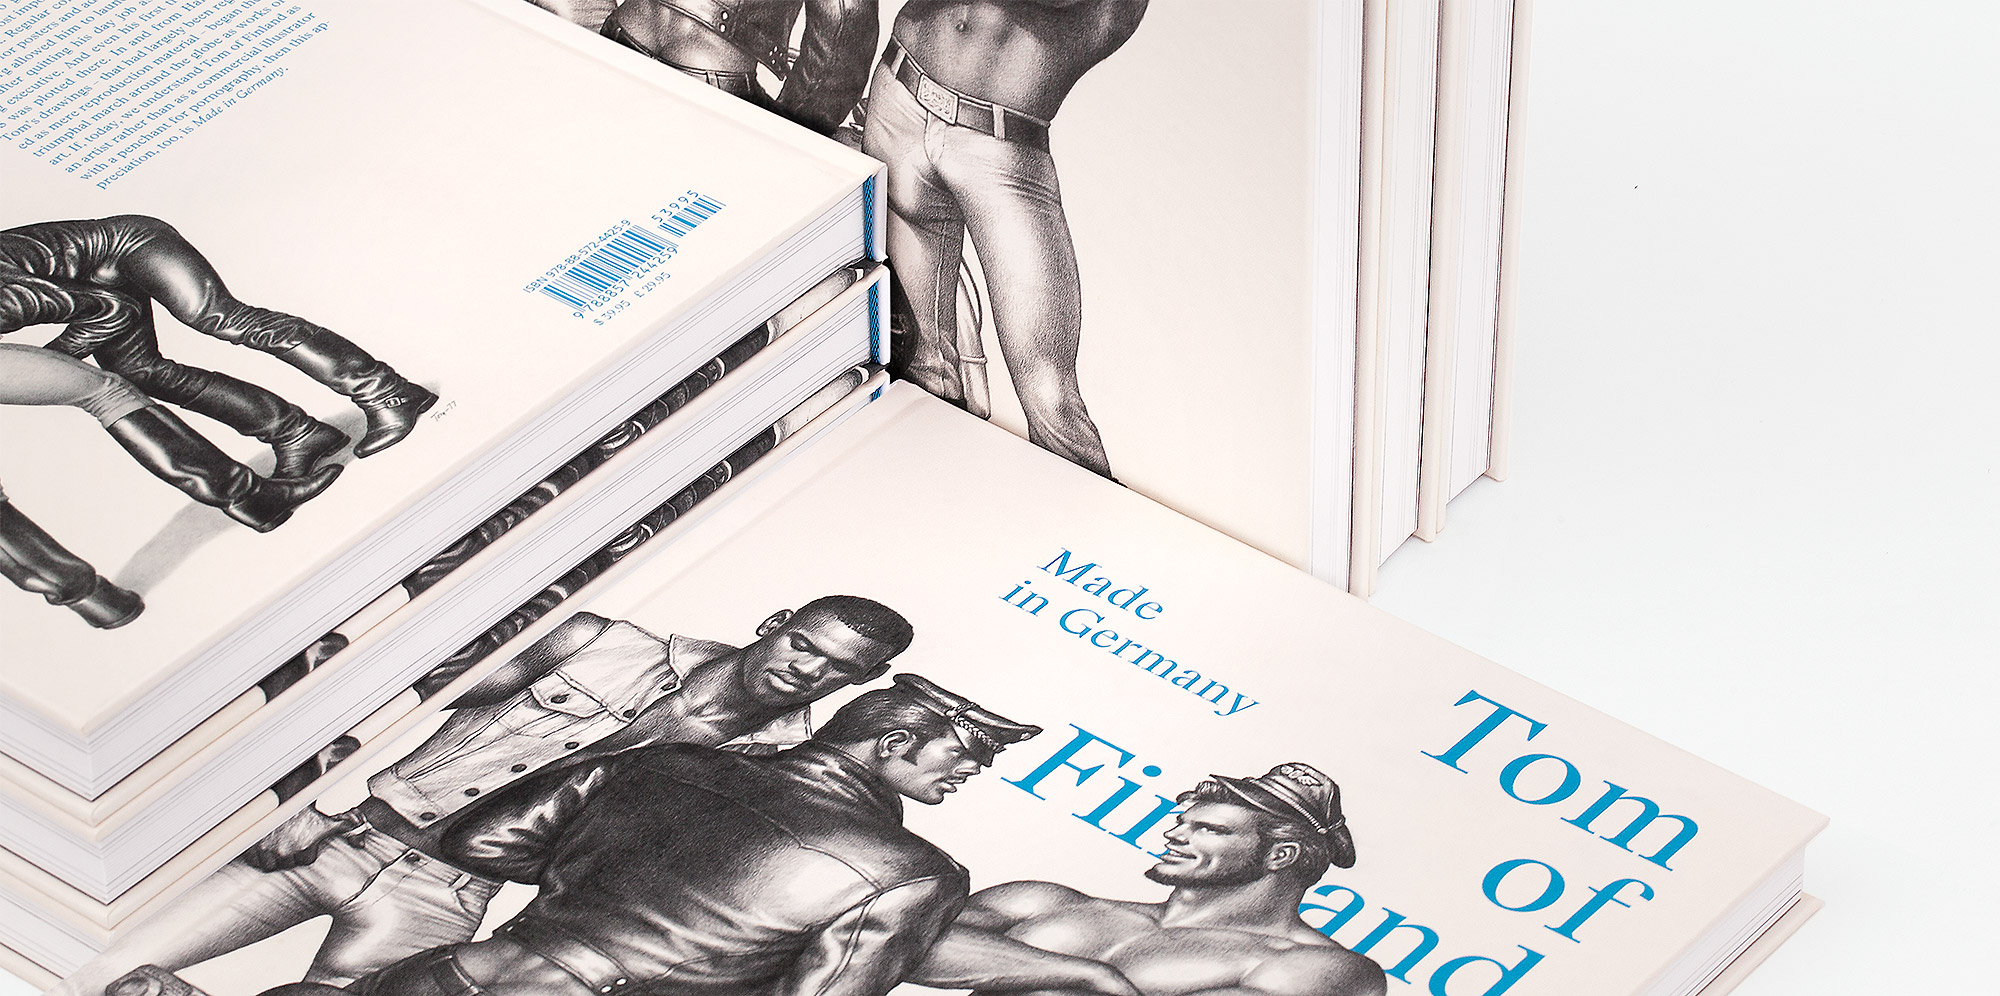 Tom of Finland Made in Germany bookdesign for Galerie Judin and Skira publisher by Jakob Straub